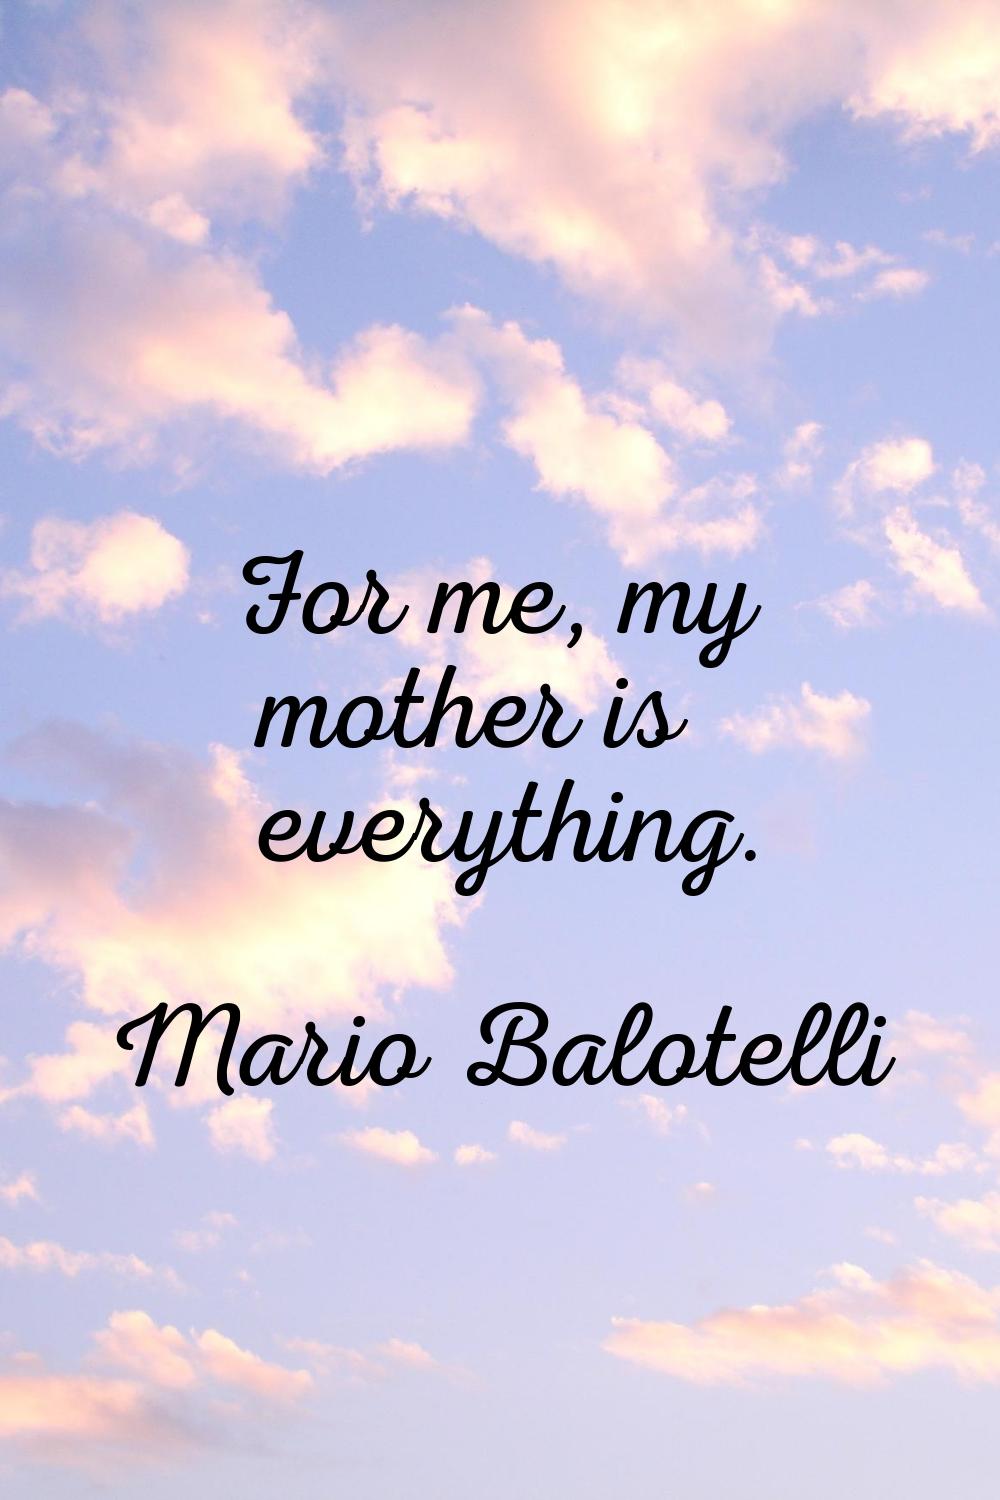 For me, my mother is everything.